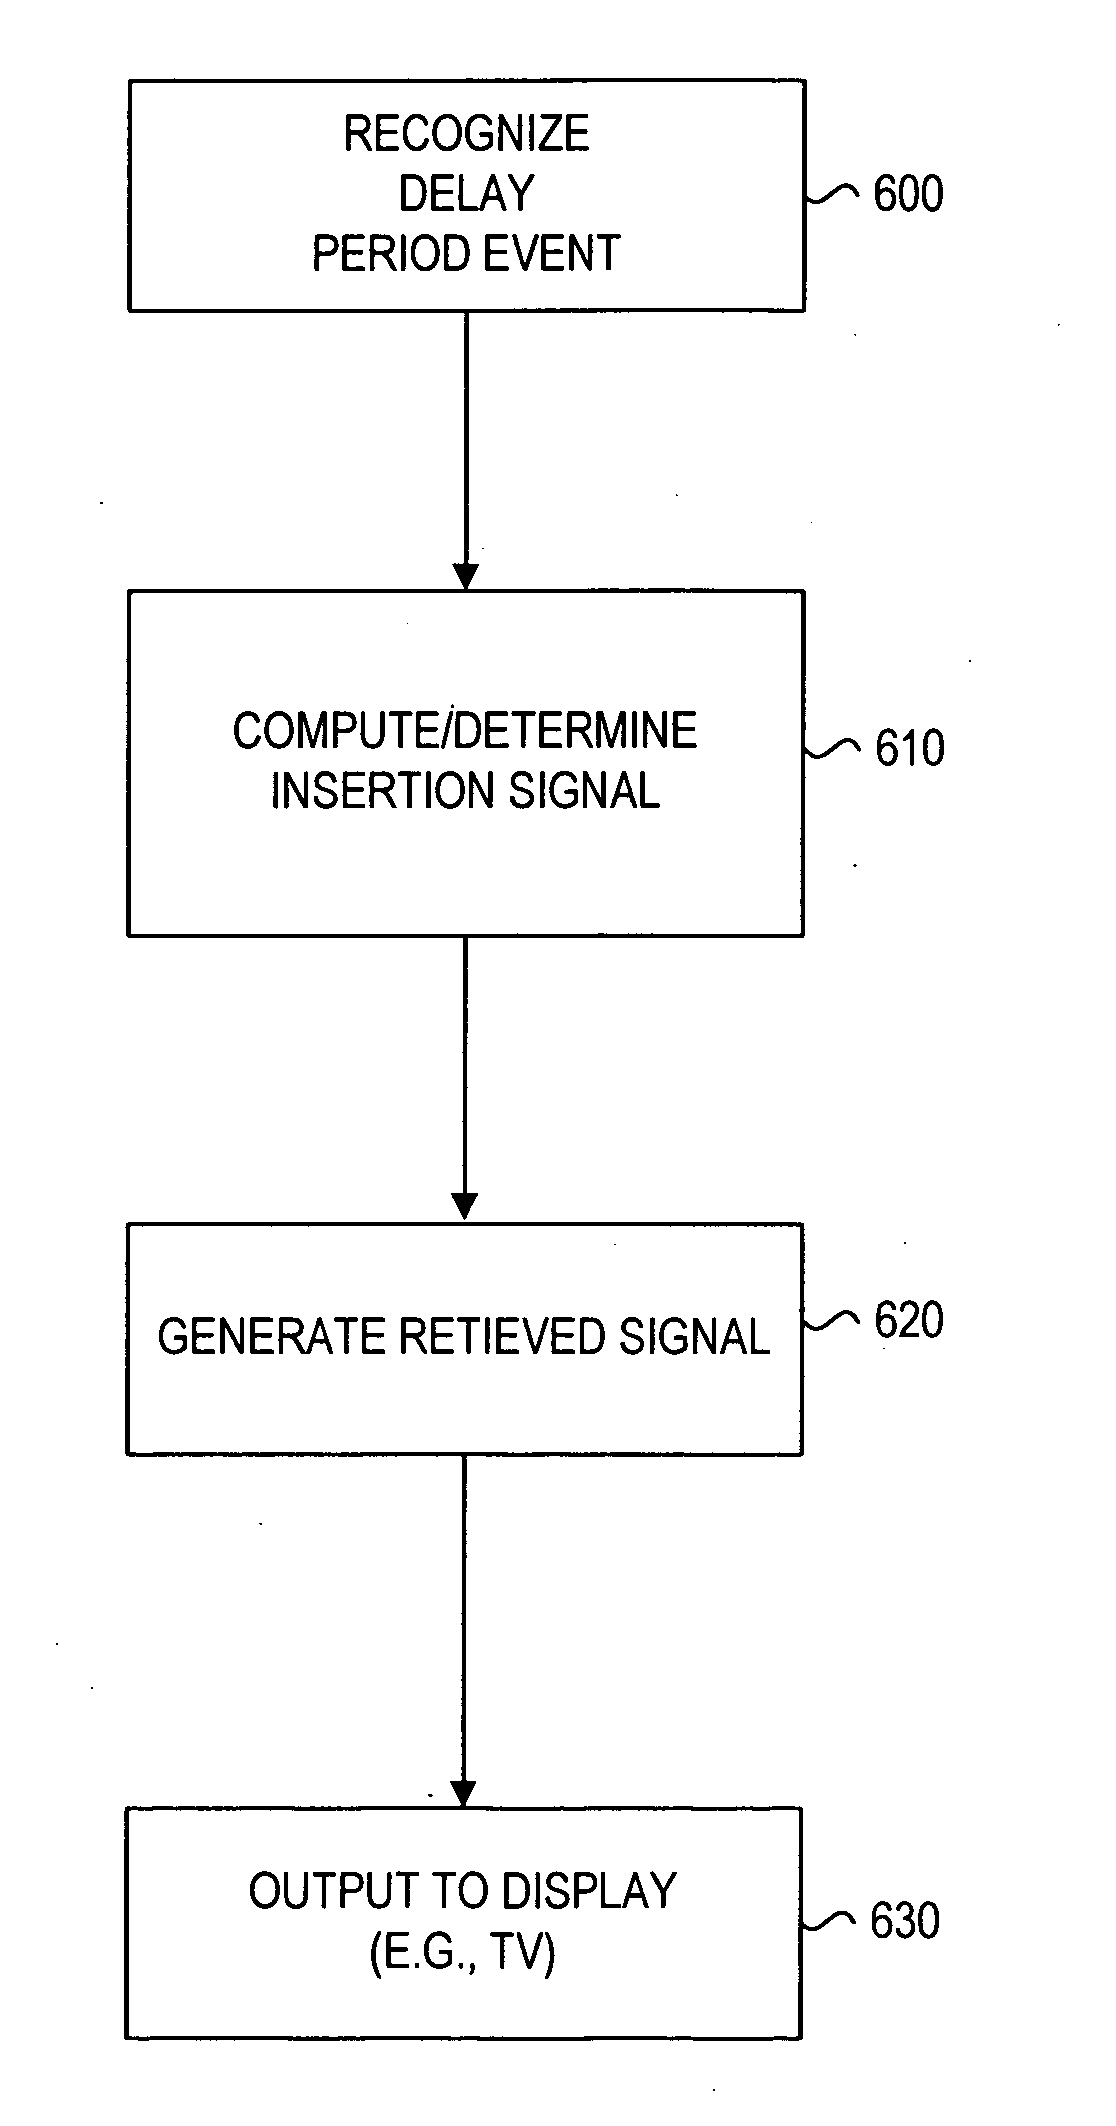 Inserting local signals during channel changes